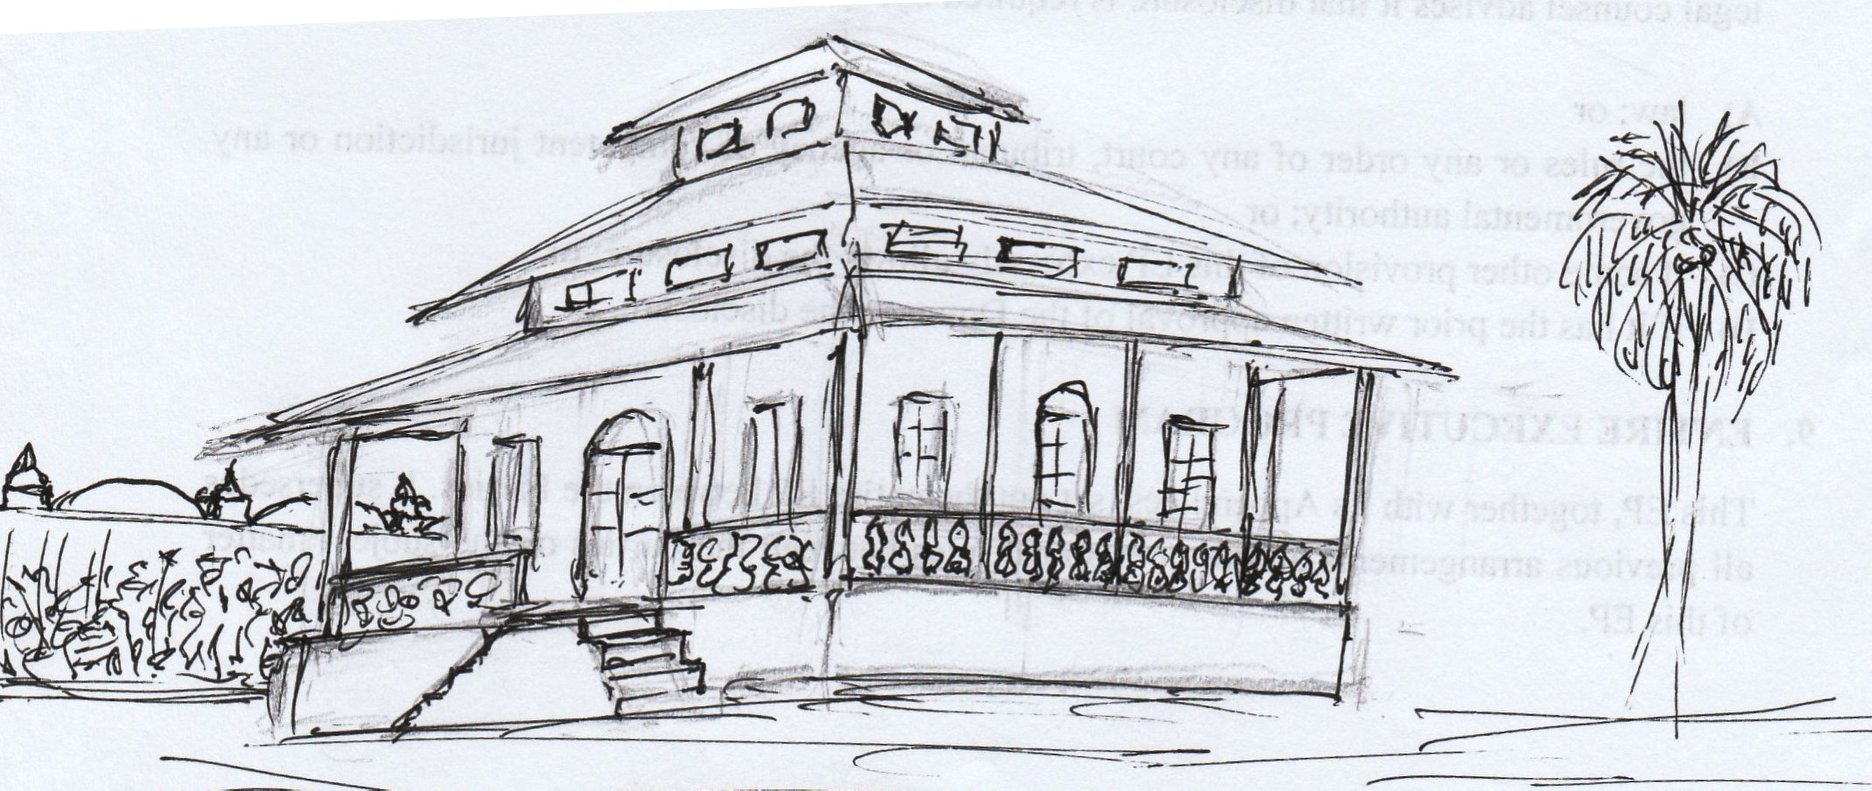 Picture 5. A sketch of the old garden house